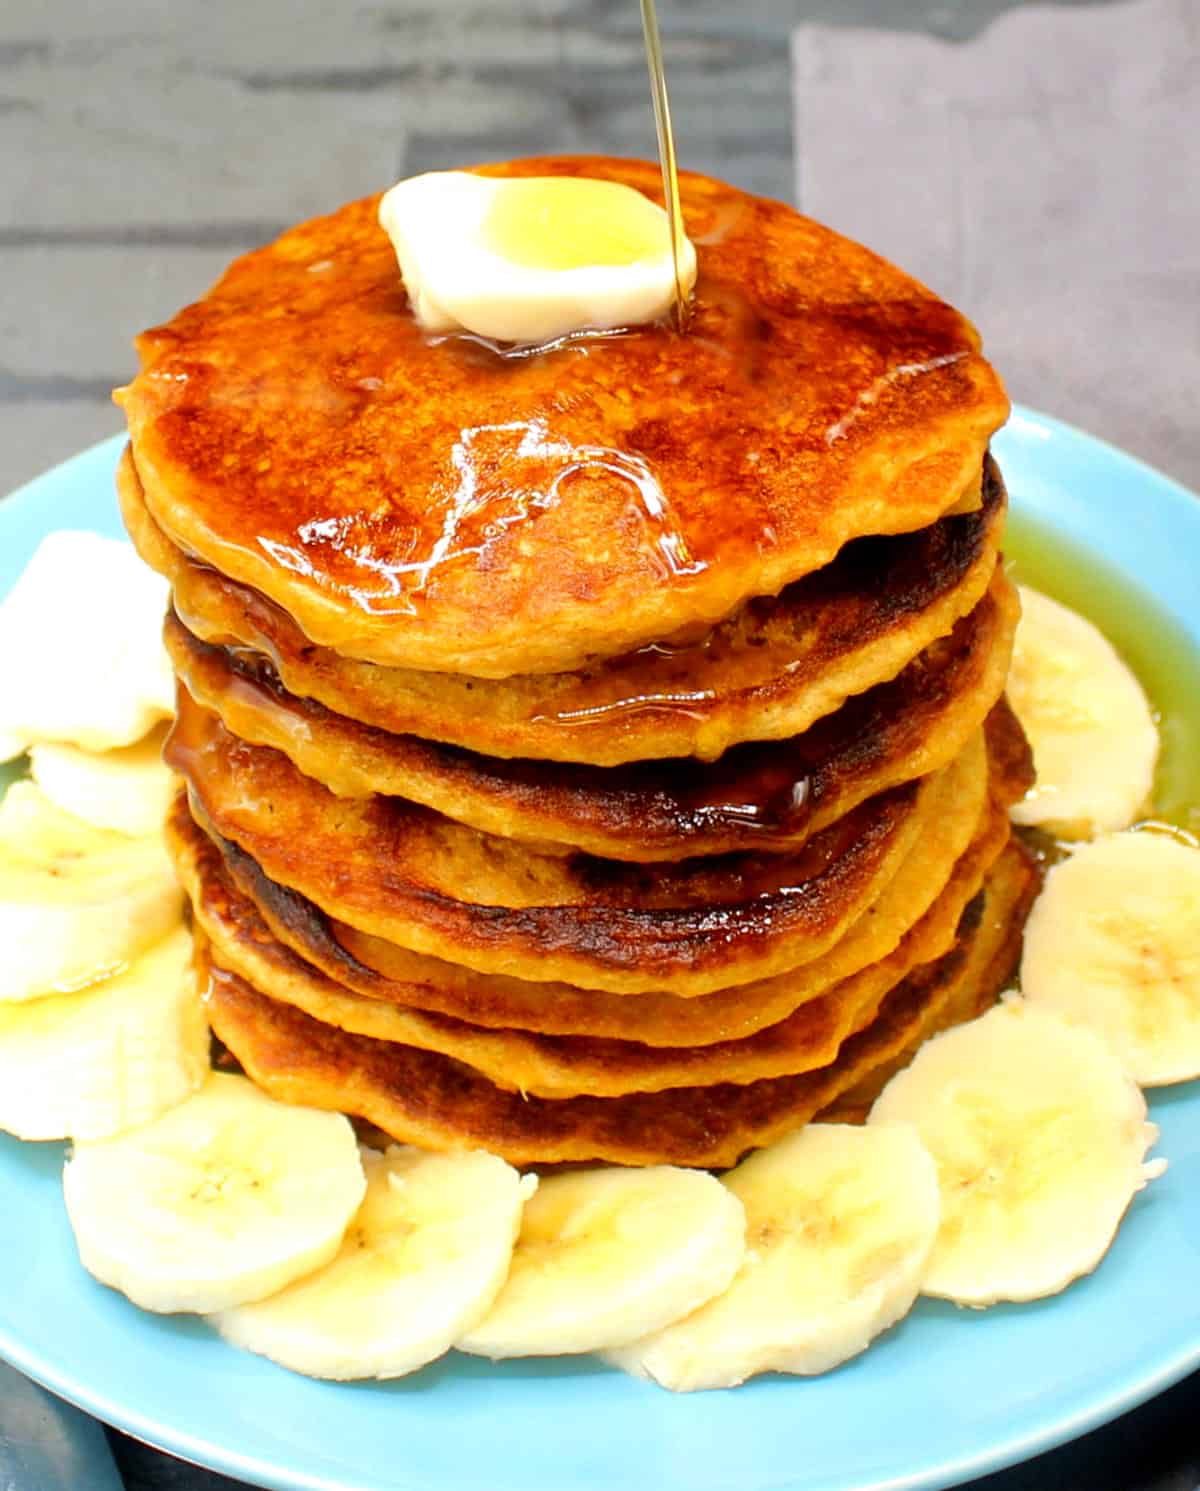 Vegan orange sweet potato pancakes stacked on blue plate with pat of butter and sliced bananas.